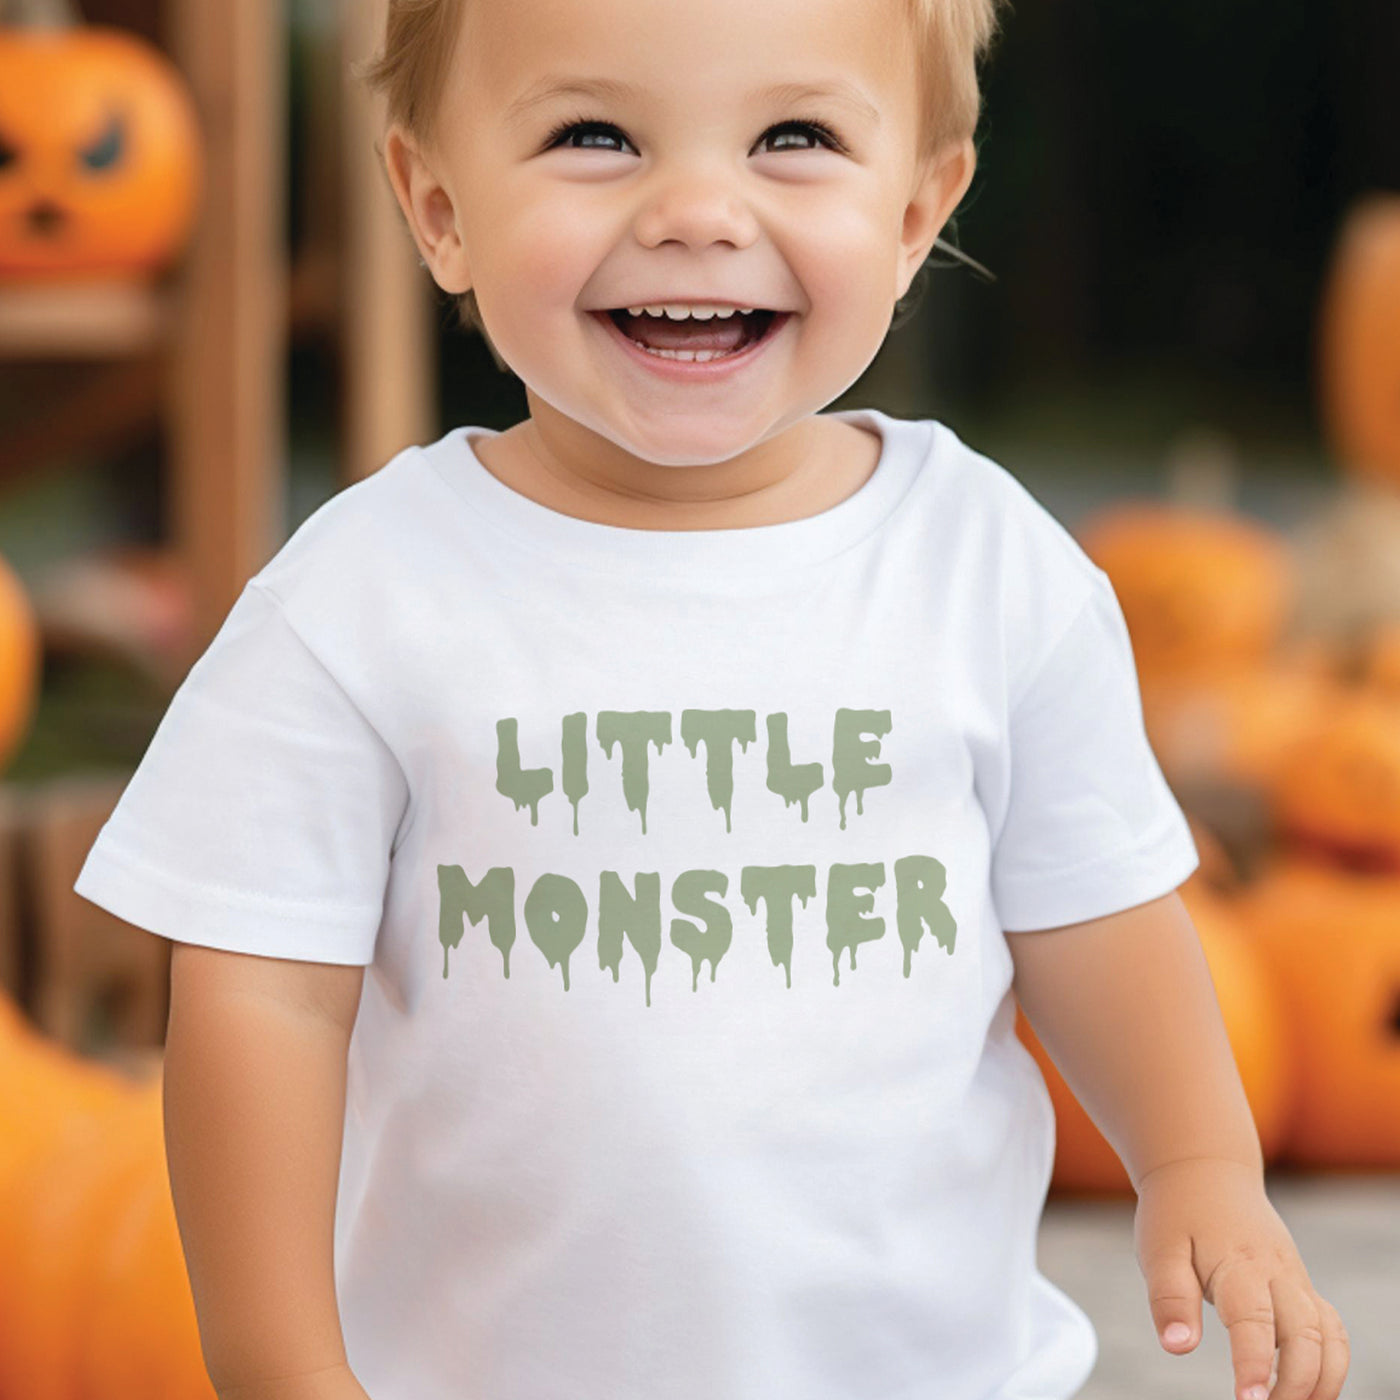 cute little boy wearing white tshirt with sage green little monster dripping text print, standing in front of halloween jack o lantern pumpkins